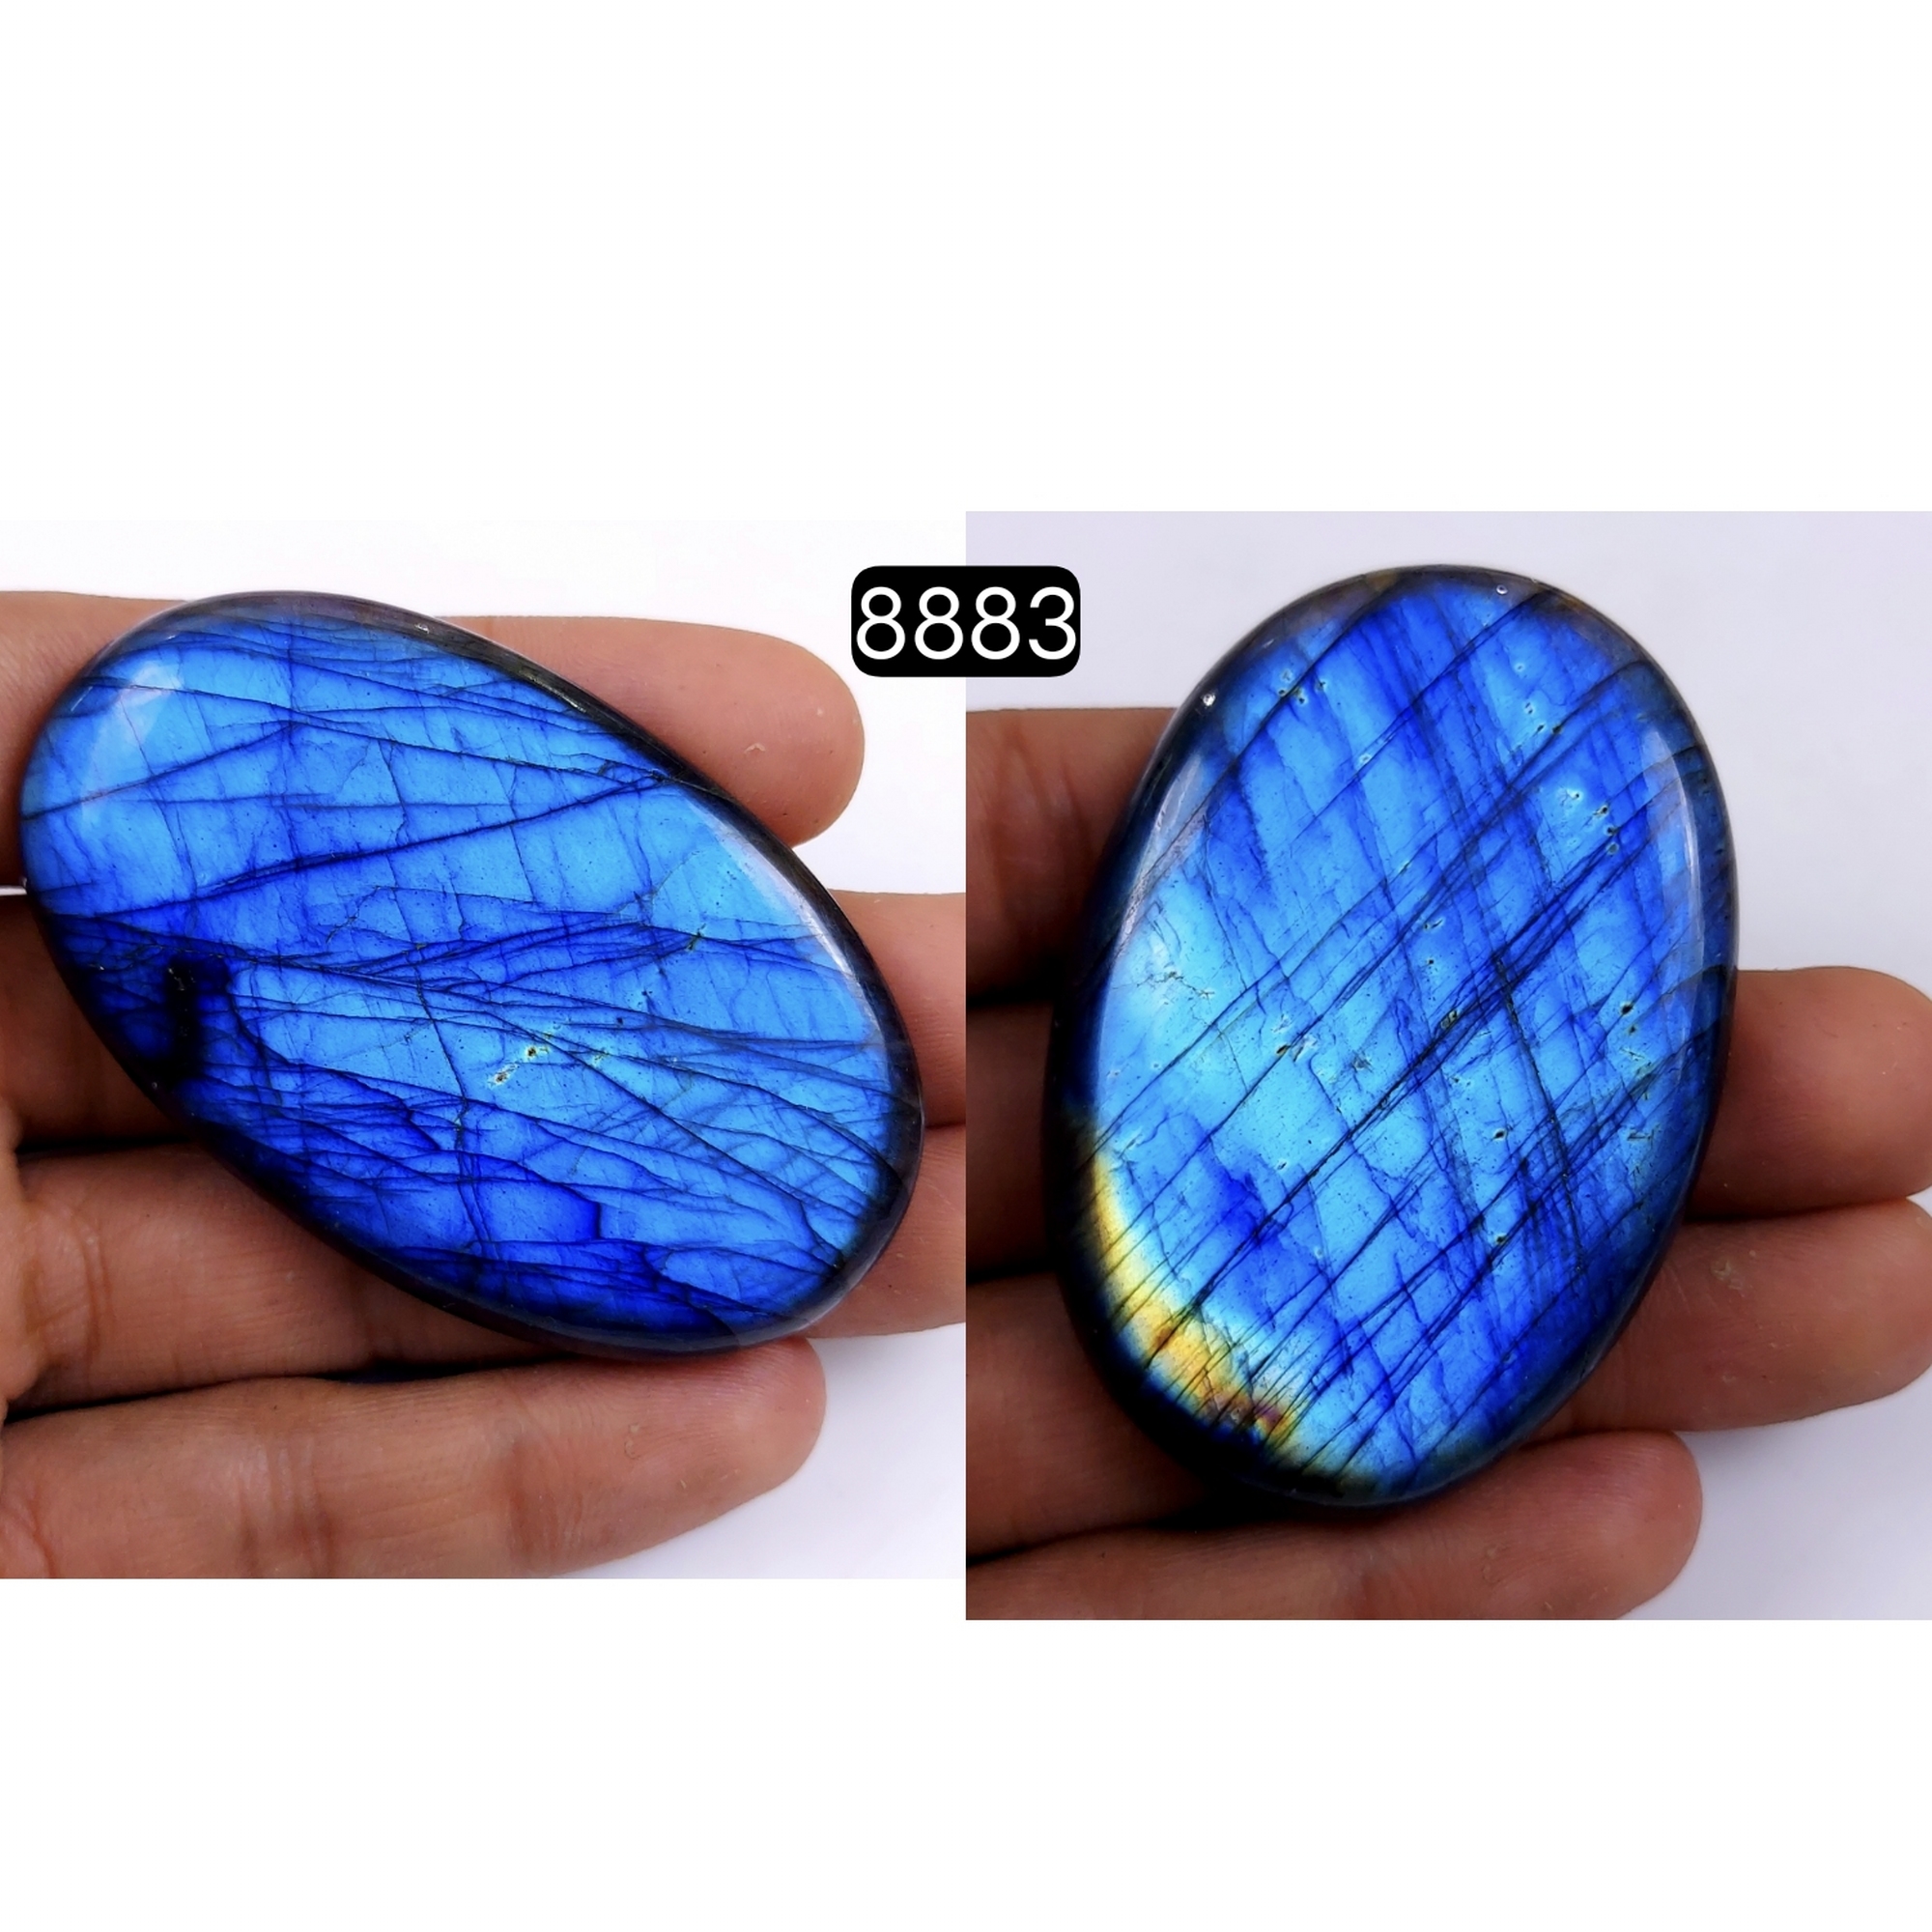 2Pcs 499Cts  Natural Labradorite Oval Shape Loose Gemstone Cabochon Lot For Jewelry Making 66x38 60x41mm#8883